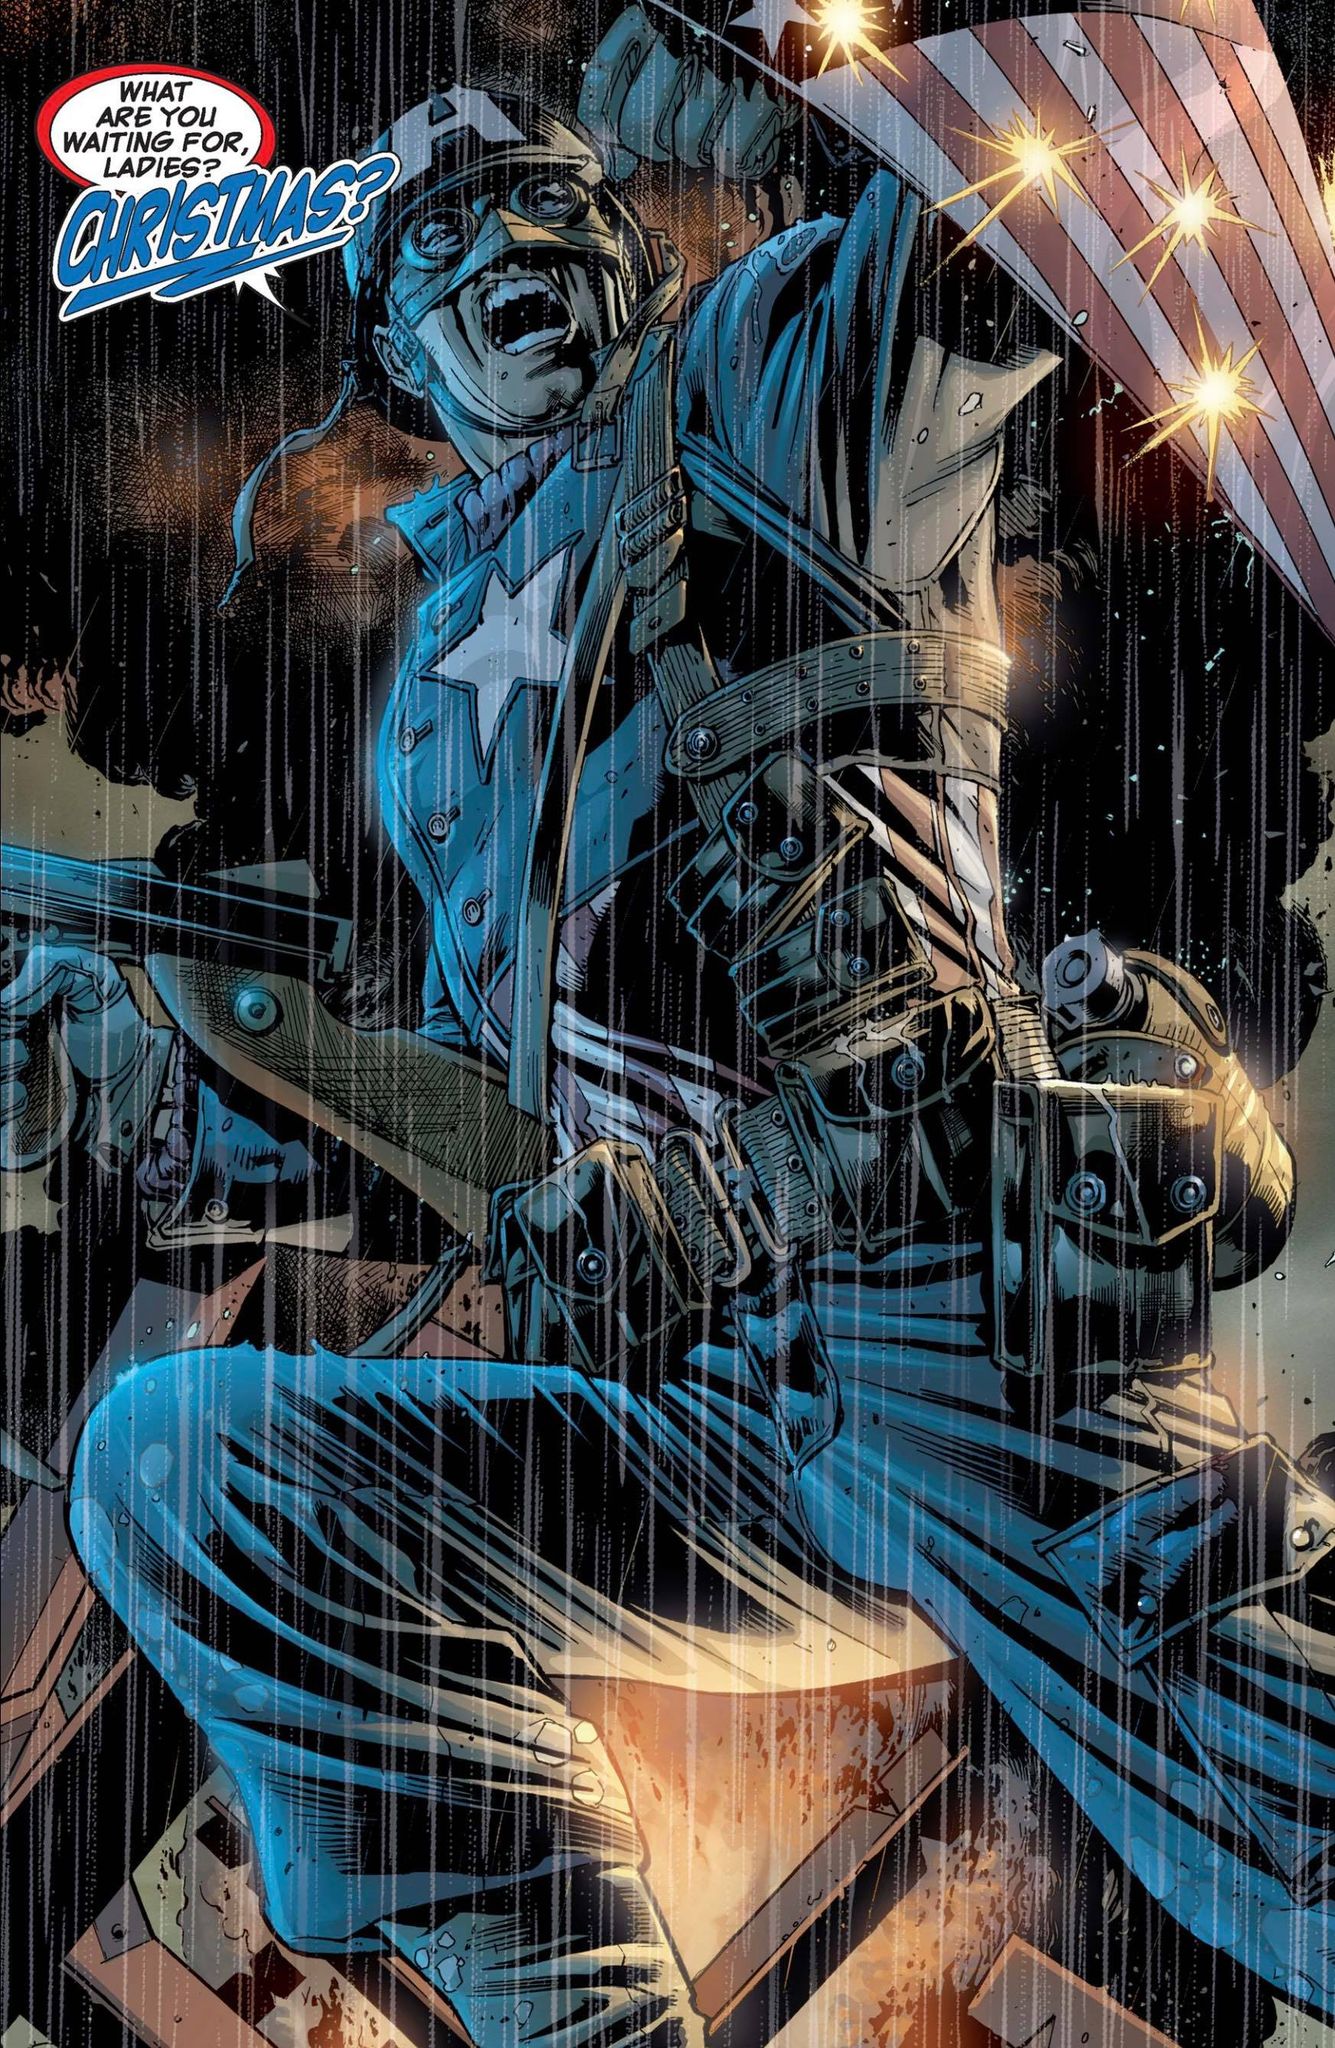 Captain America (from Ultimate Comics #1)